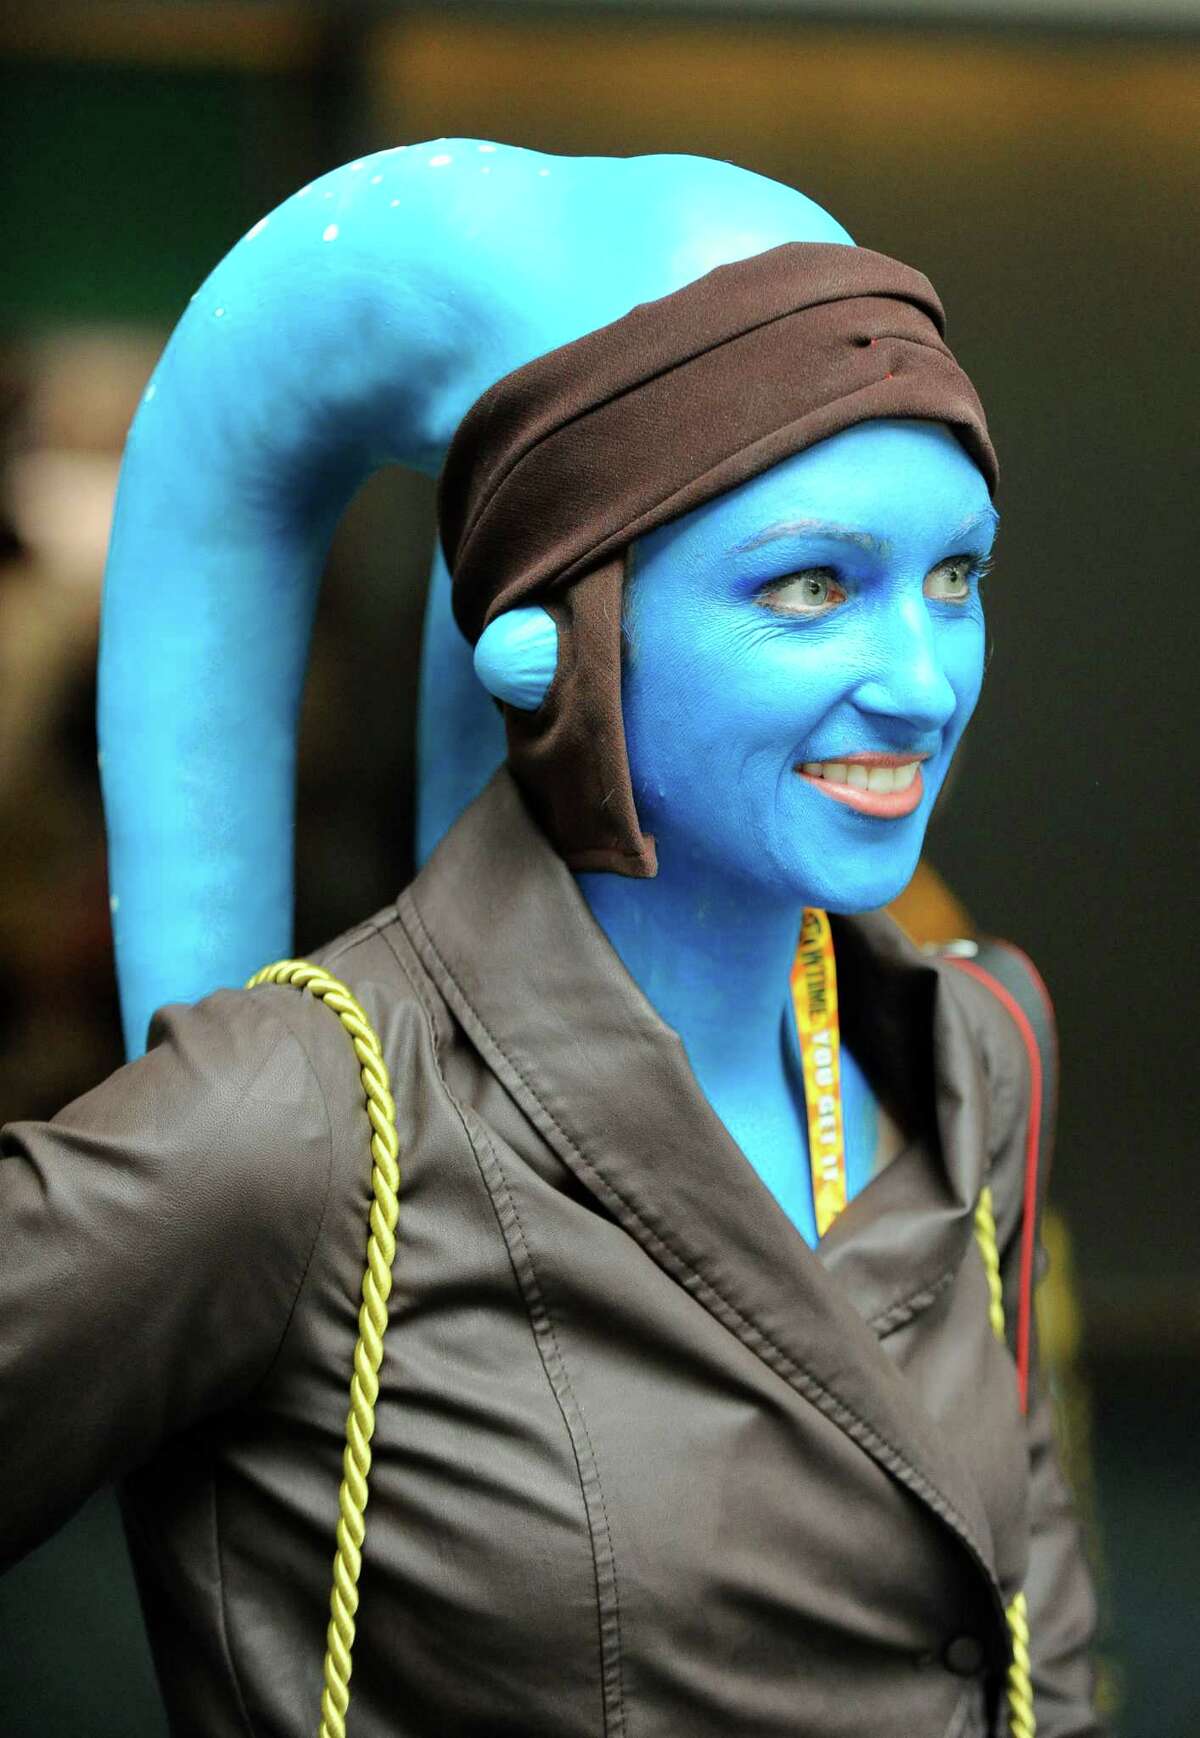 Spencer, dressed as a Twi'lek from Star Wars movies, walks into the ex...